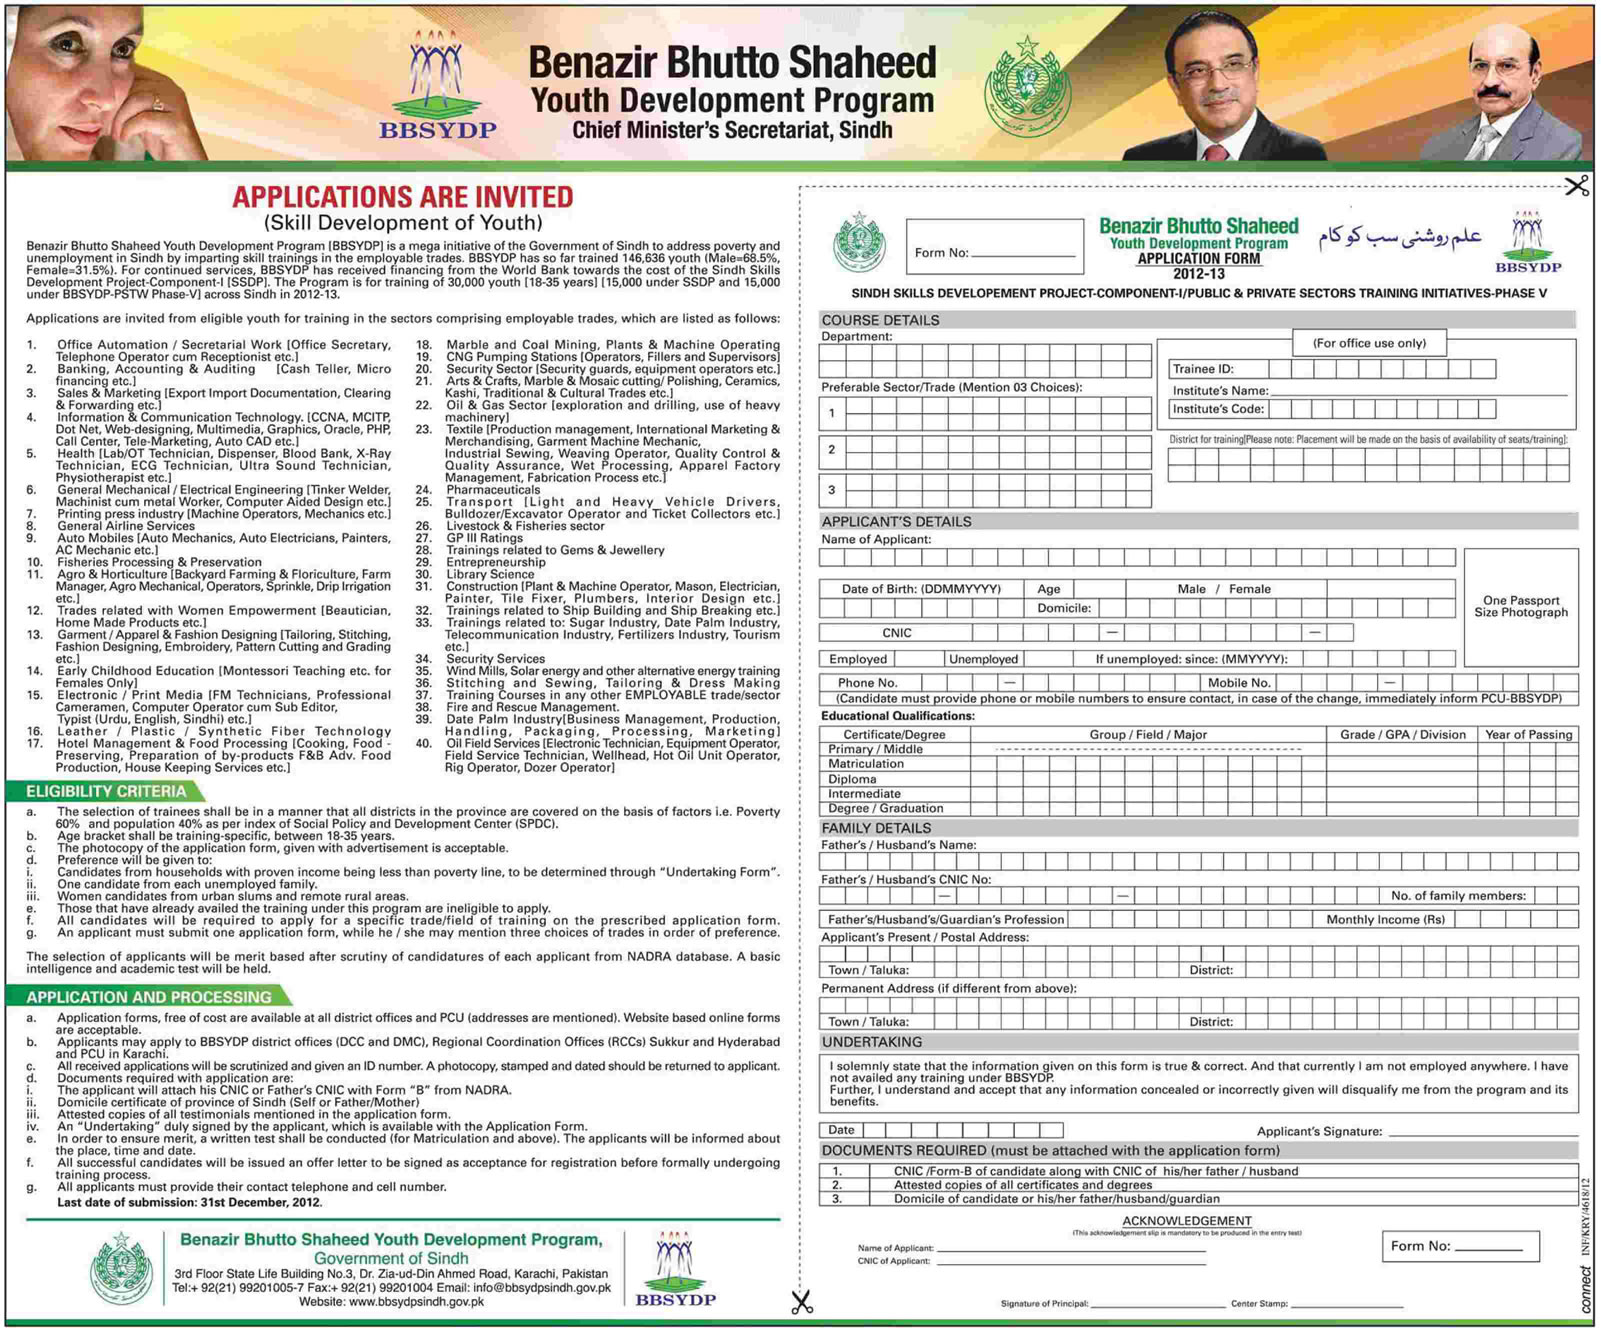 BBSYDP Application Form 2012-2013 SSDP PSTW Phase 5 Training Courses